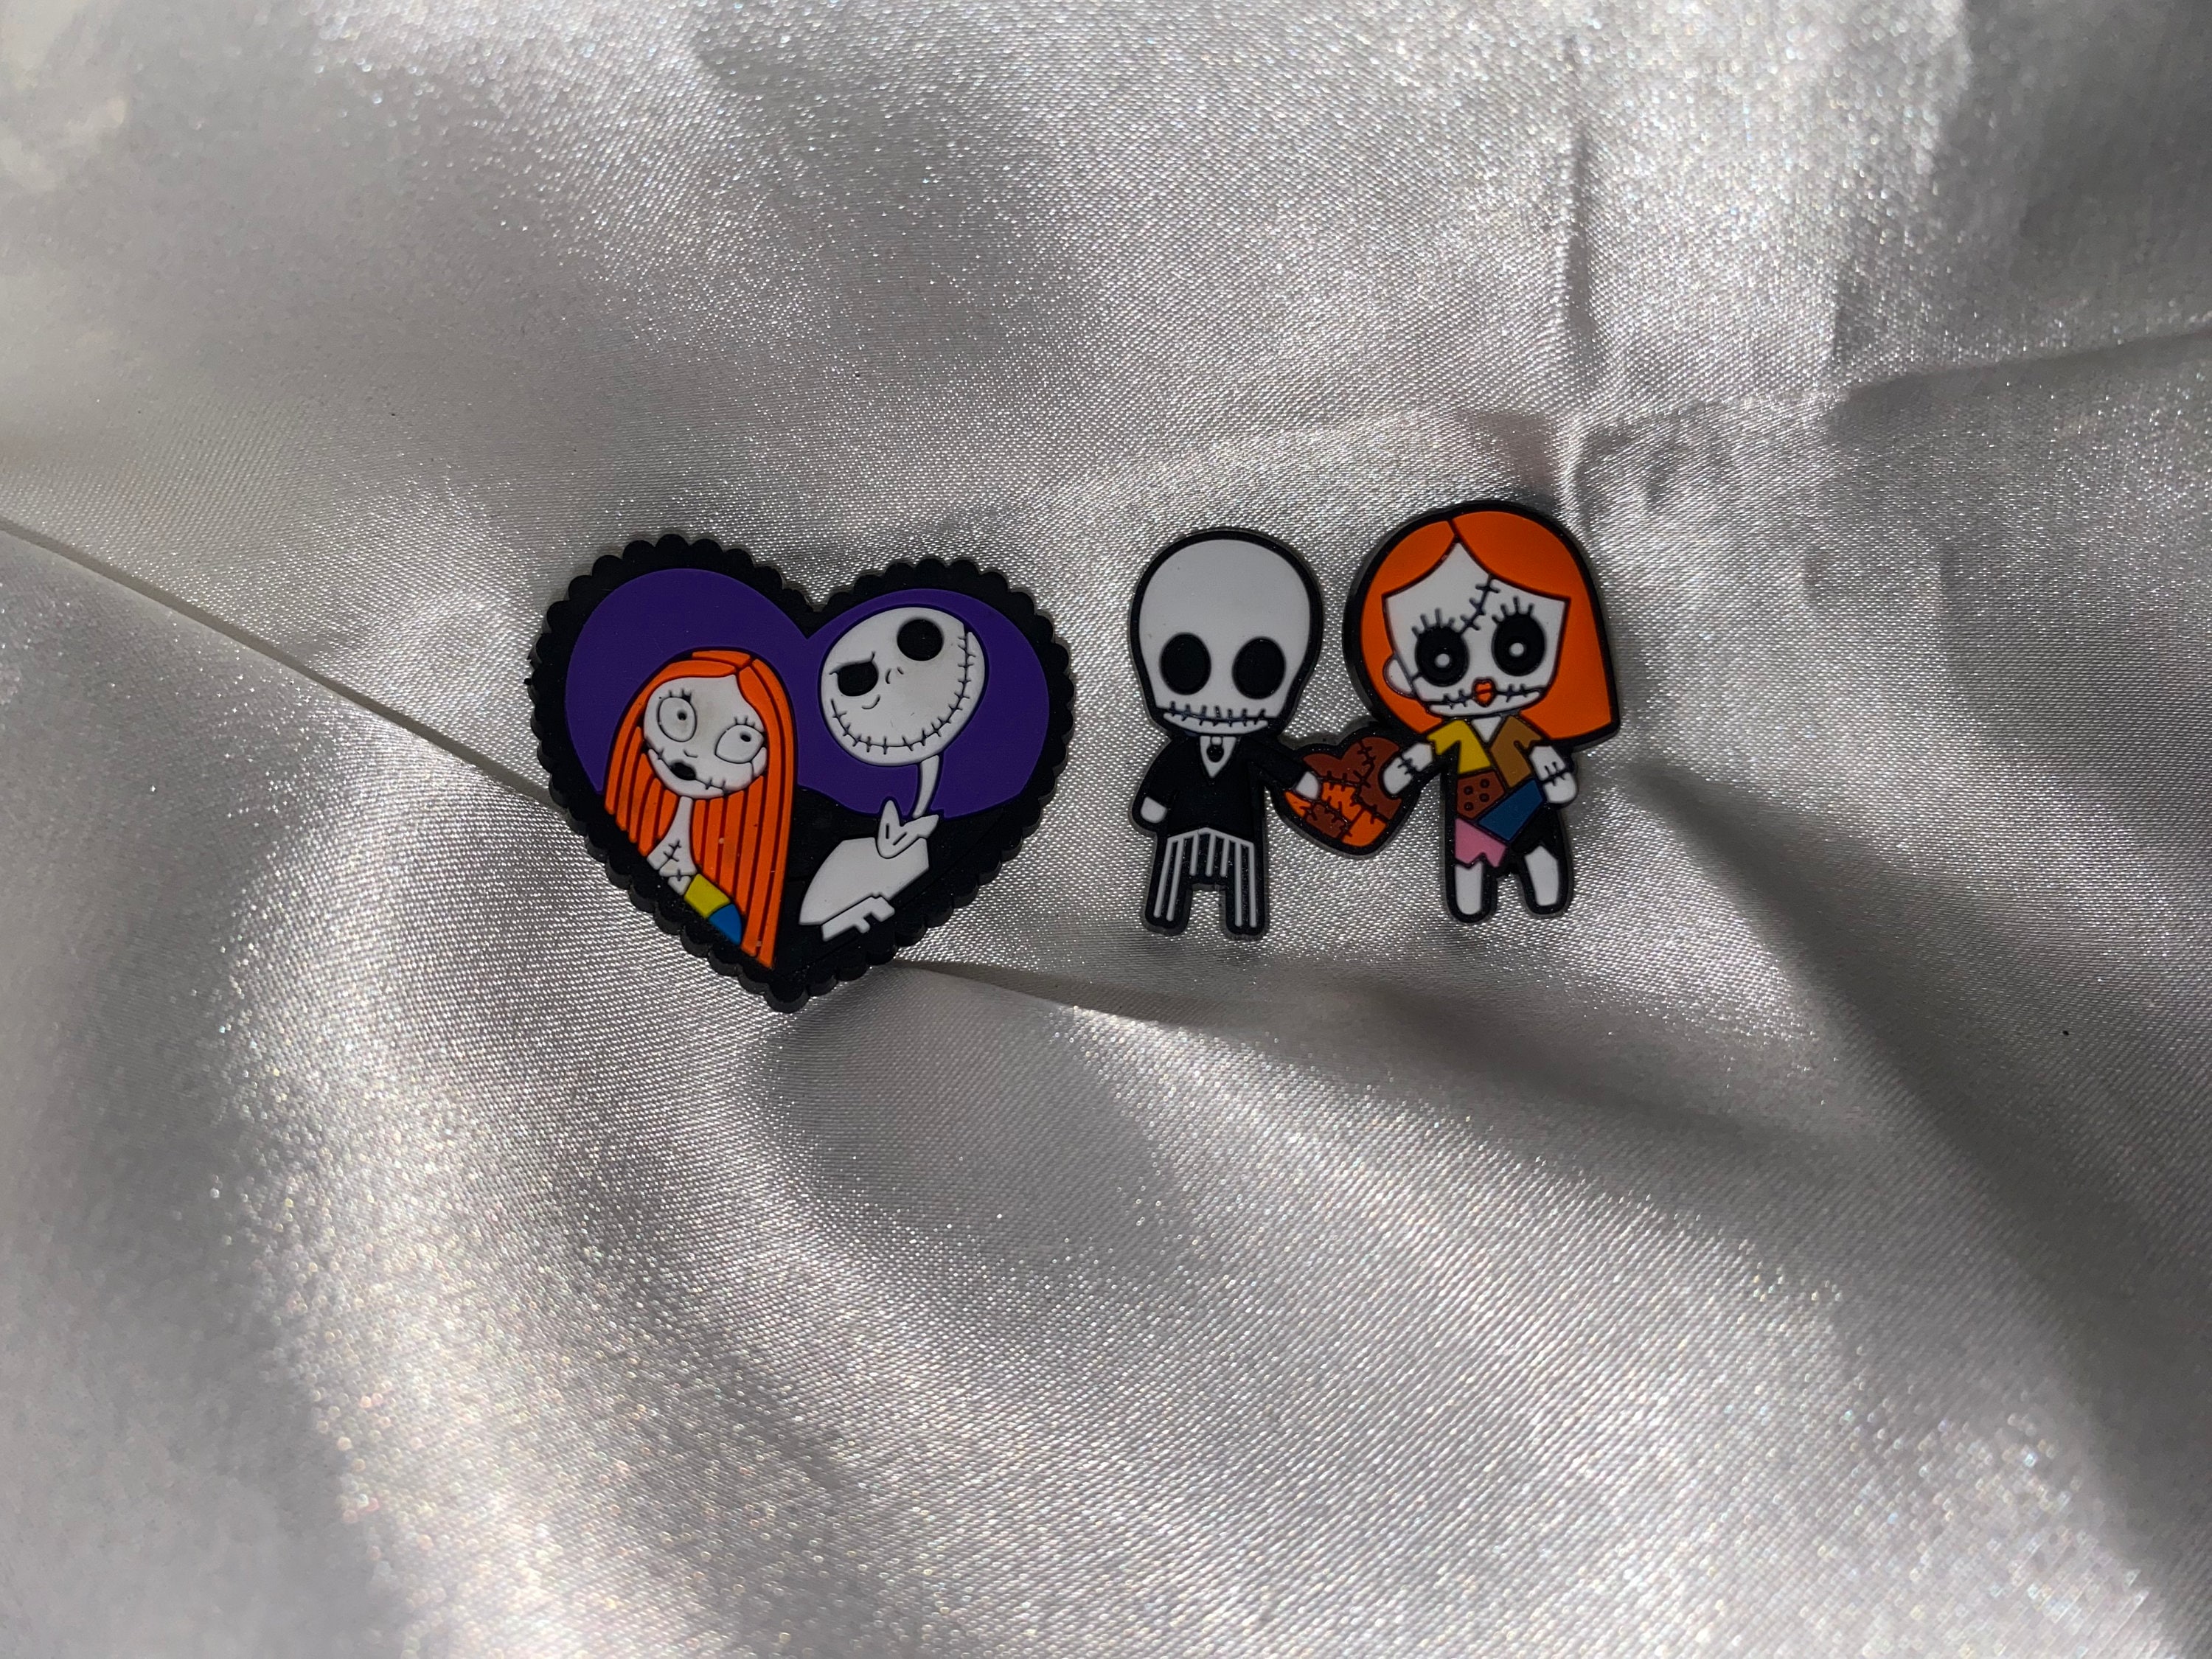 Crocs - 💀🎃🎅🏼🎁 Disney Tim Burton's The Nightmare Before Christmas  Jibbitz charms are the perfect gift for anyone on the nice or naughty list!  (Including yourself.)